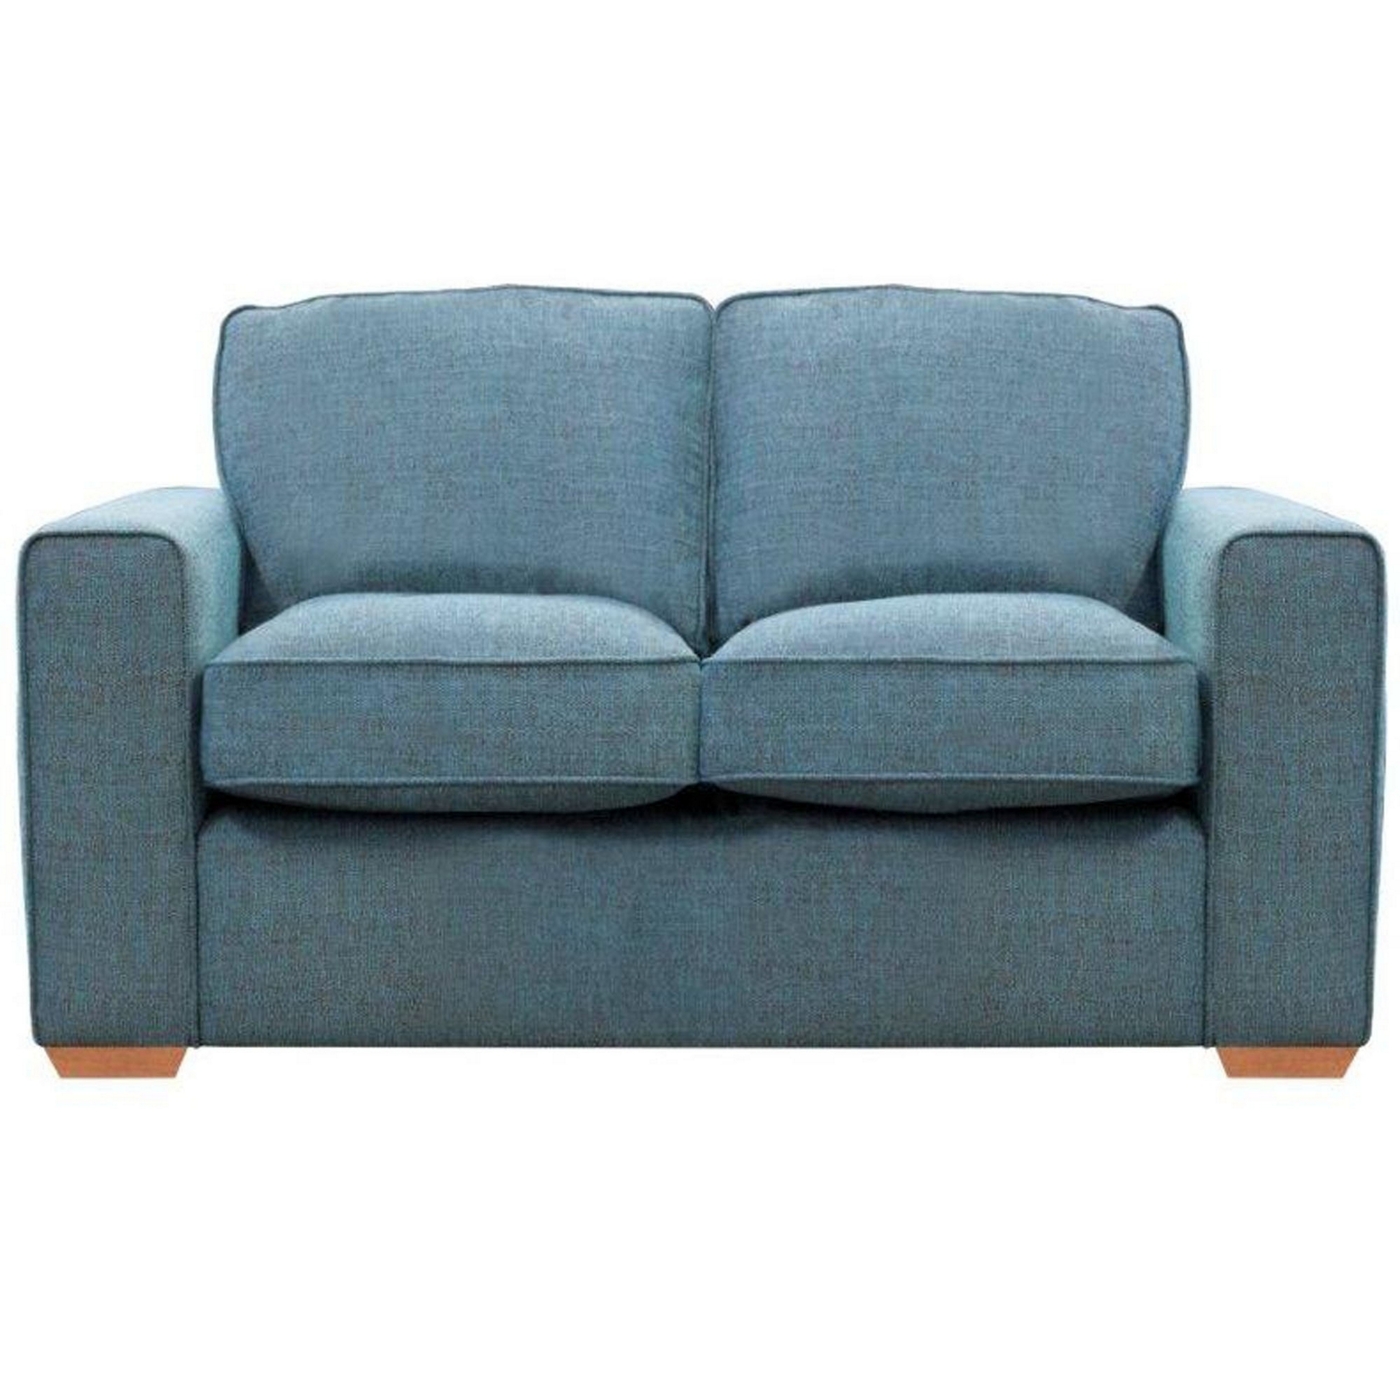 Teal blue Winwood sofa bed with light wood feet